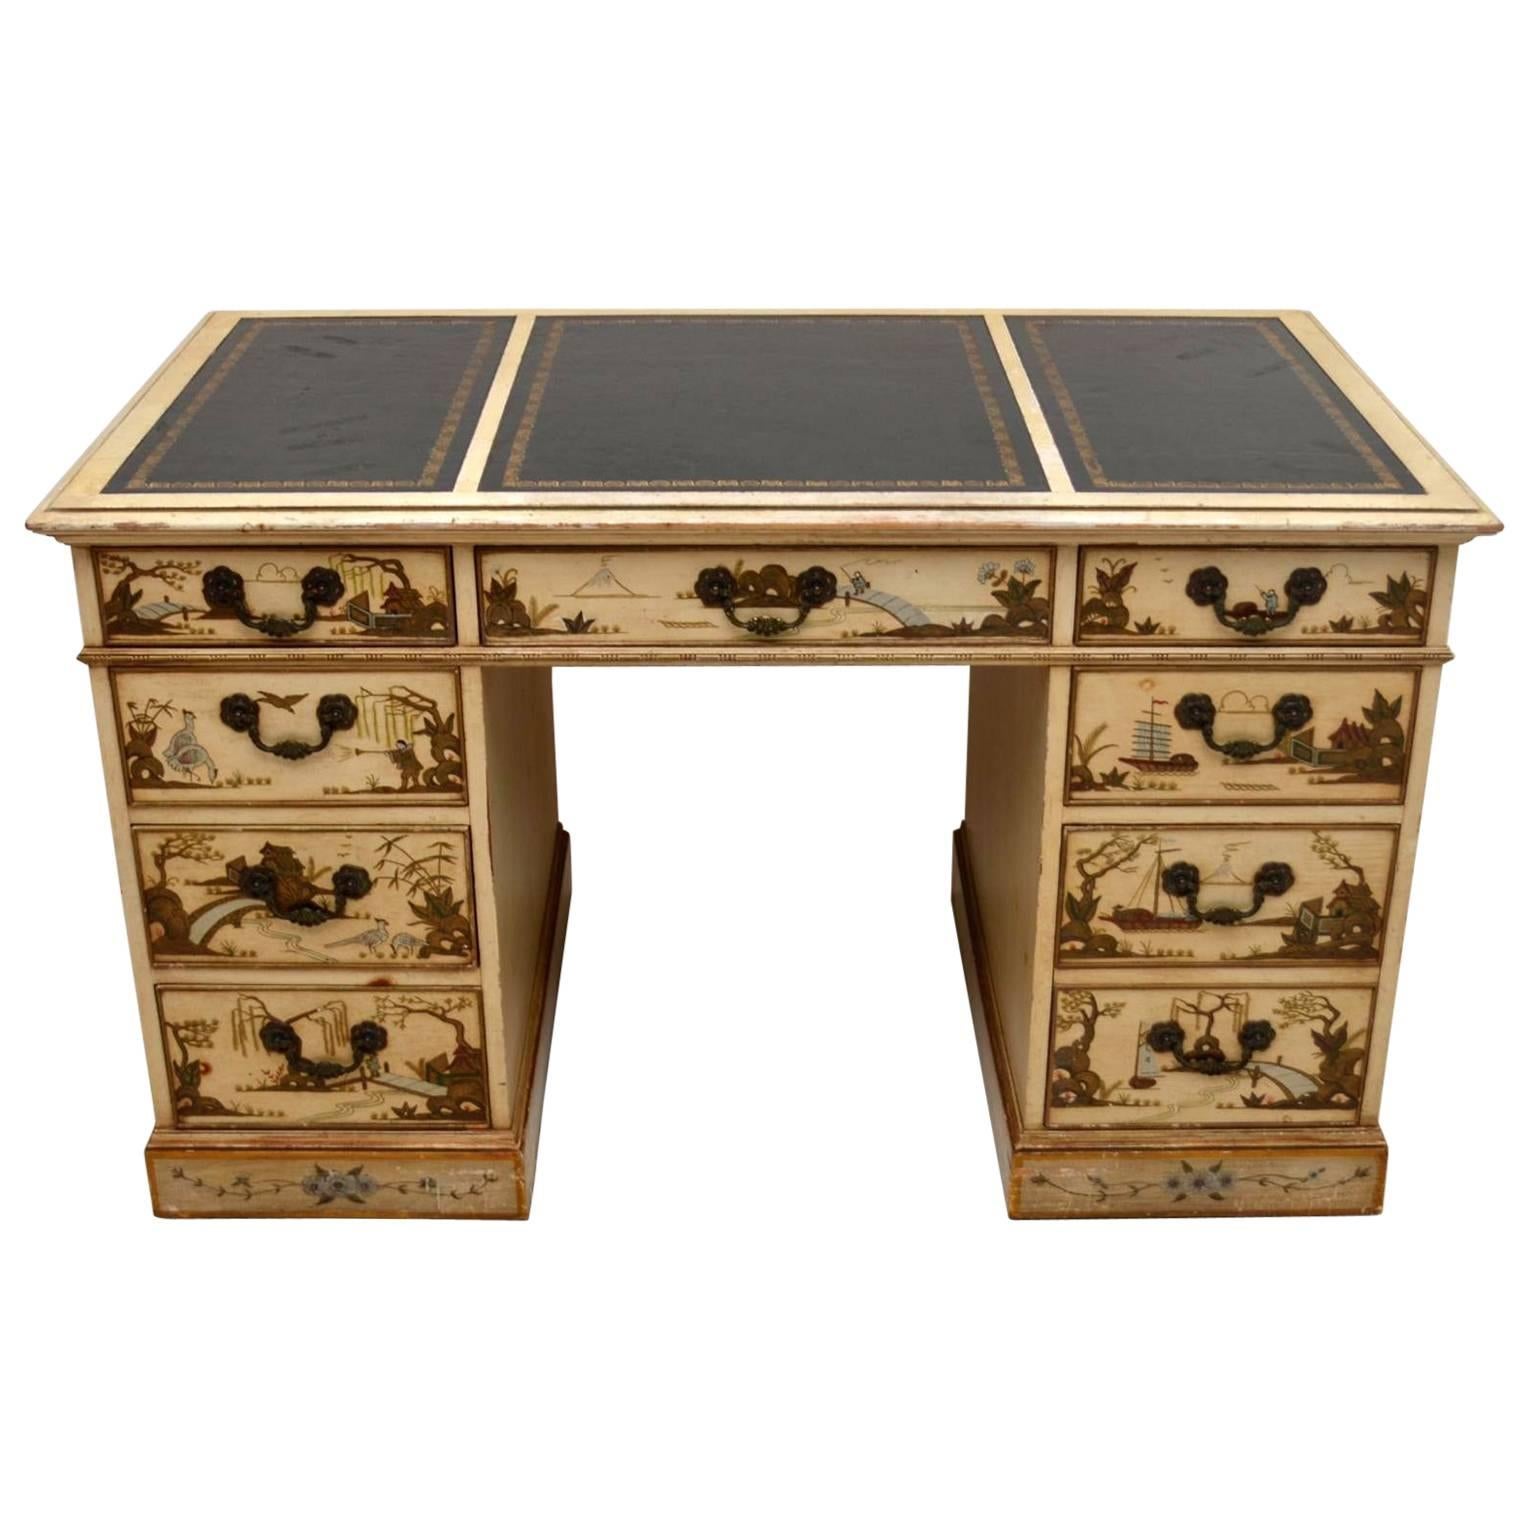 Very impressive antique chinoiserie leather top pedestal desk in wonderful original condition. It's quite rare to find original chinoiserie desks and I don't think I've ever seen one with these colors. I think it's a great advantage that the